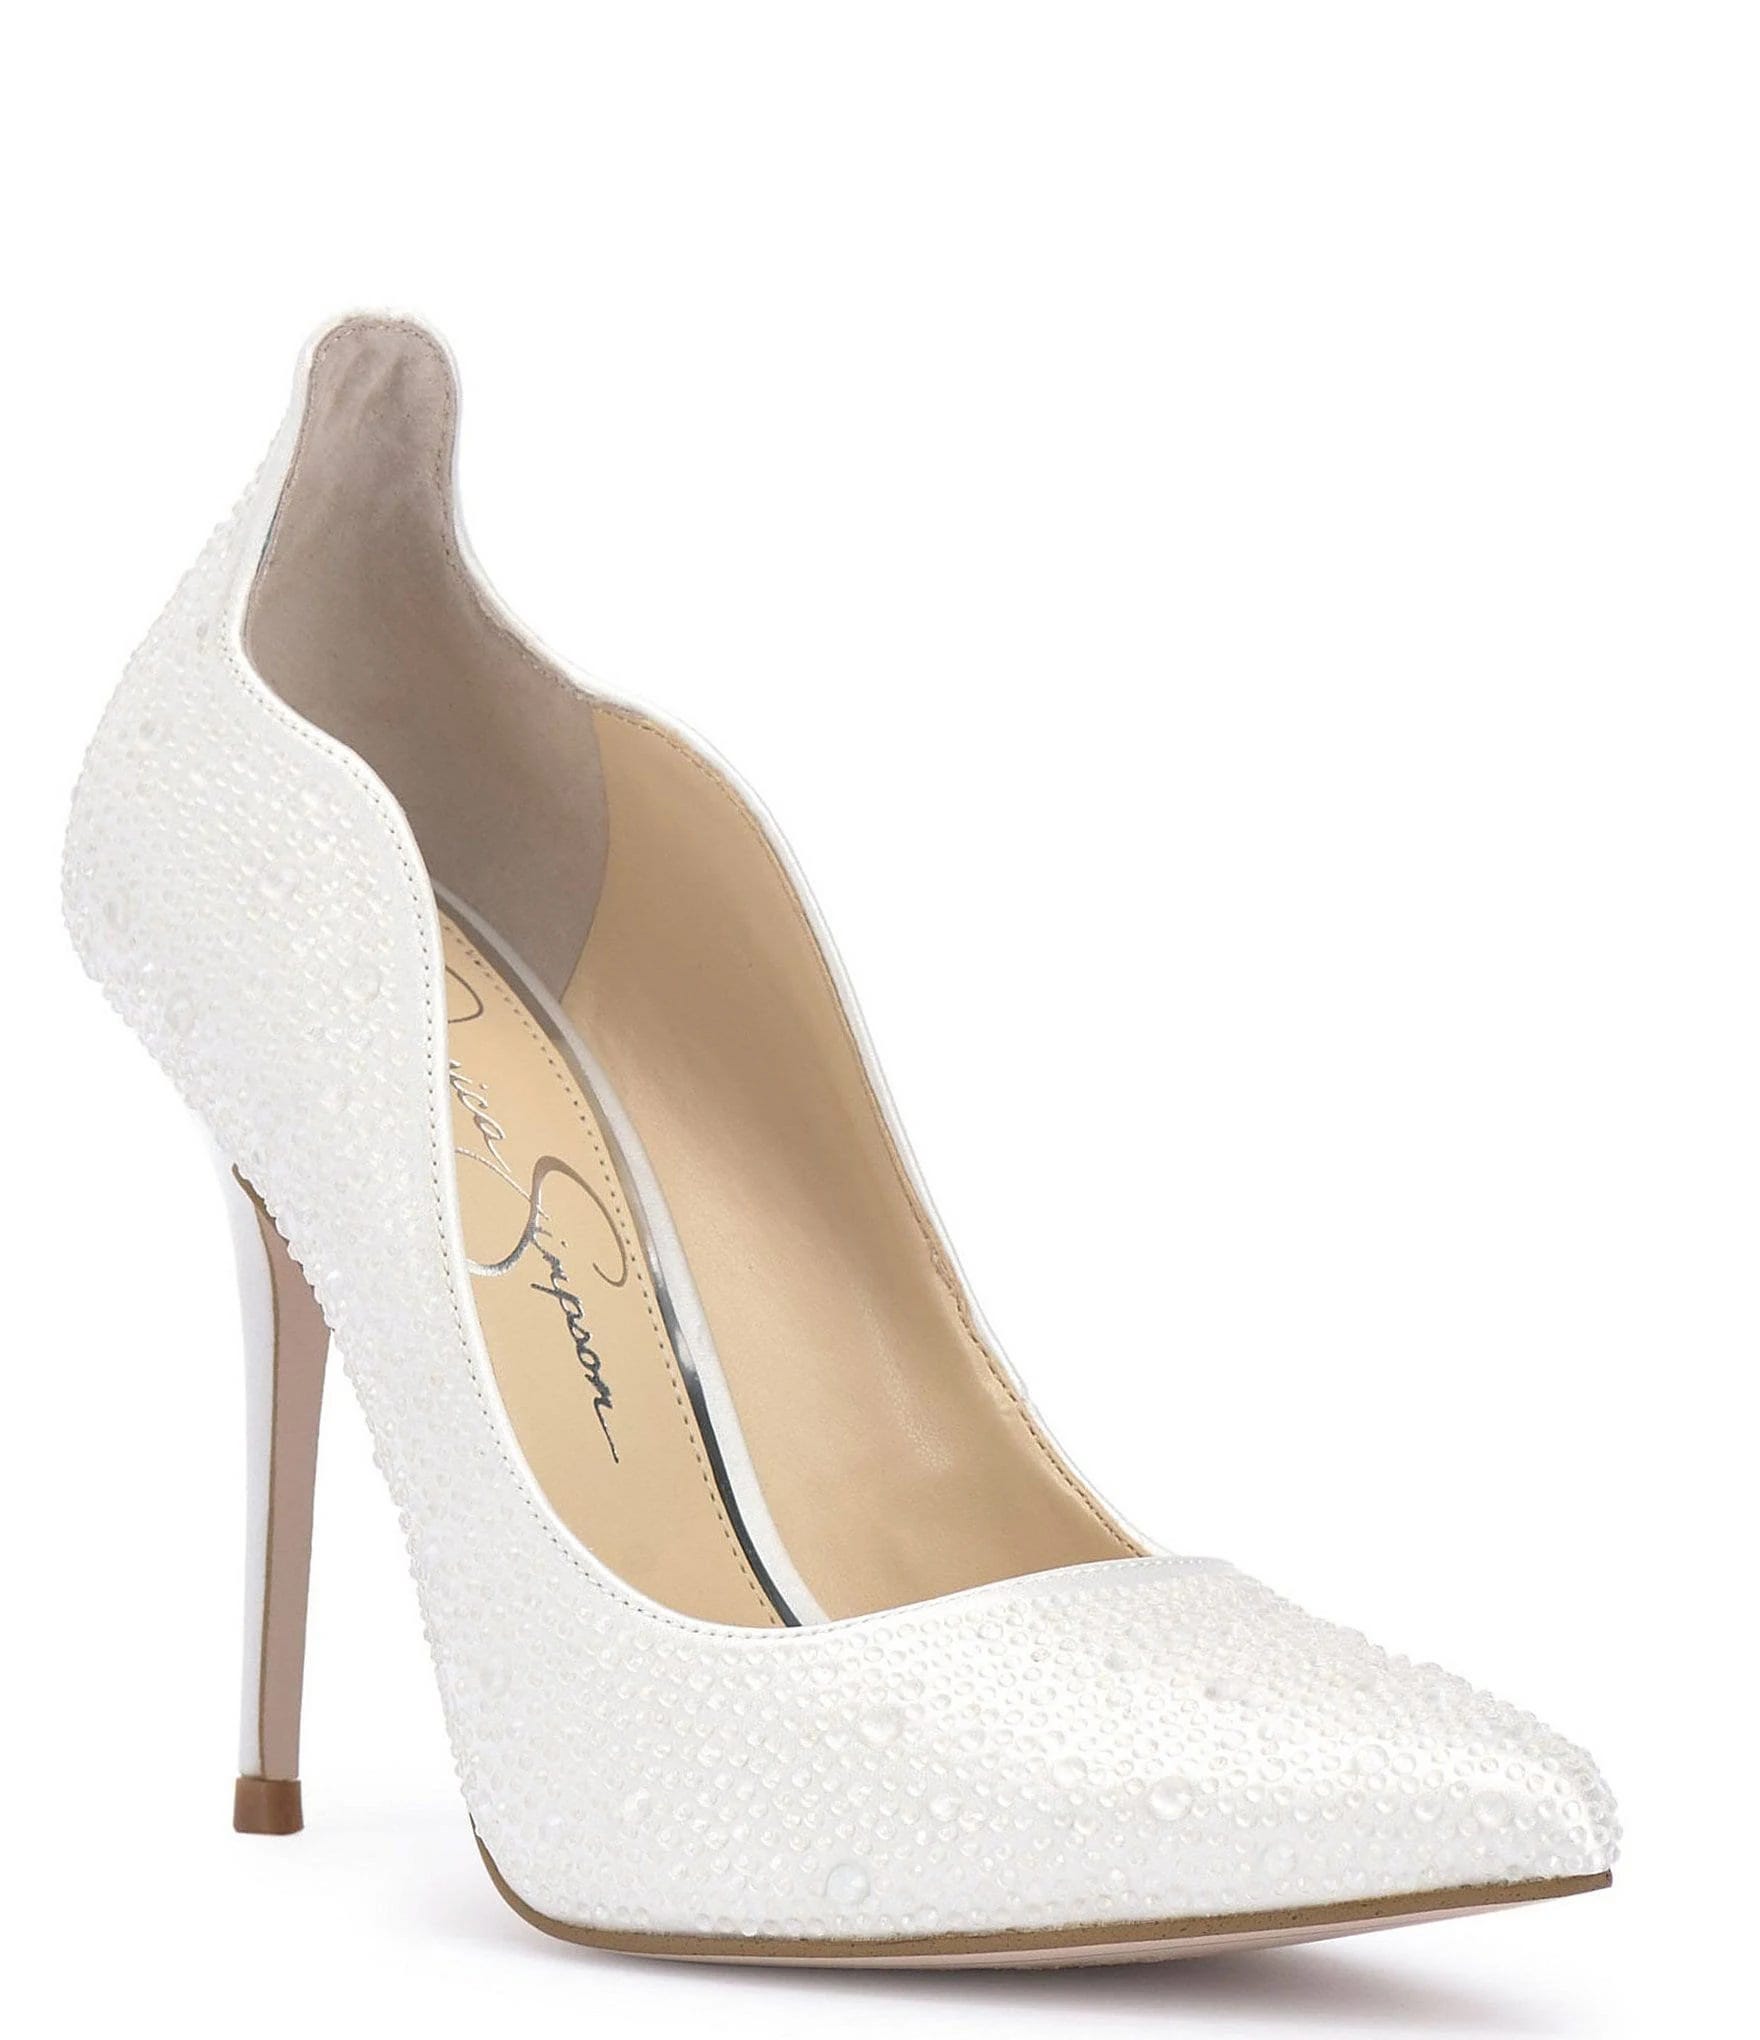 Jessica Simpson Chic White Graduation Pumps - Pull-On Satin with Leather Sole | Image